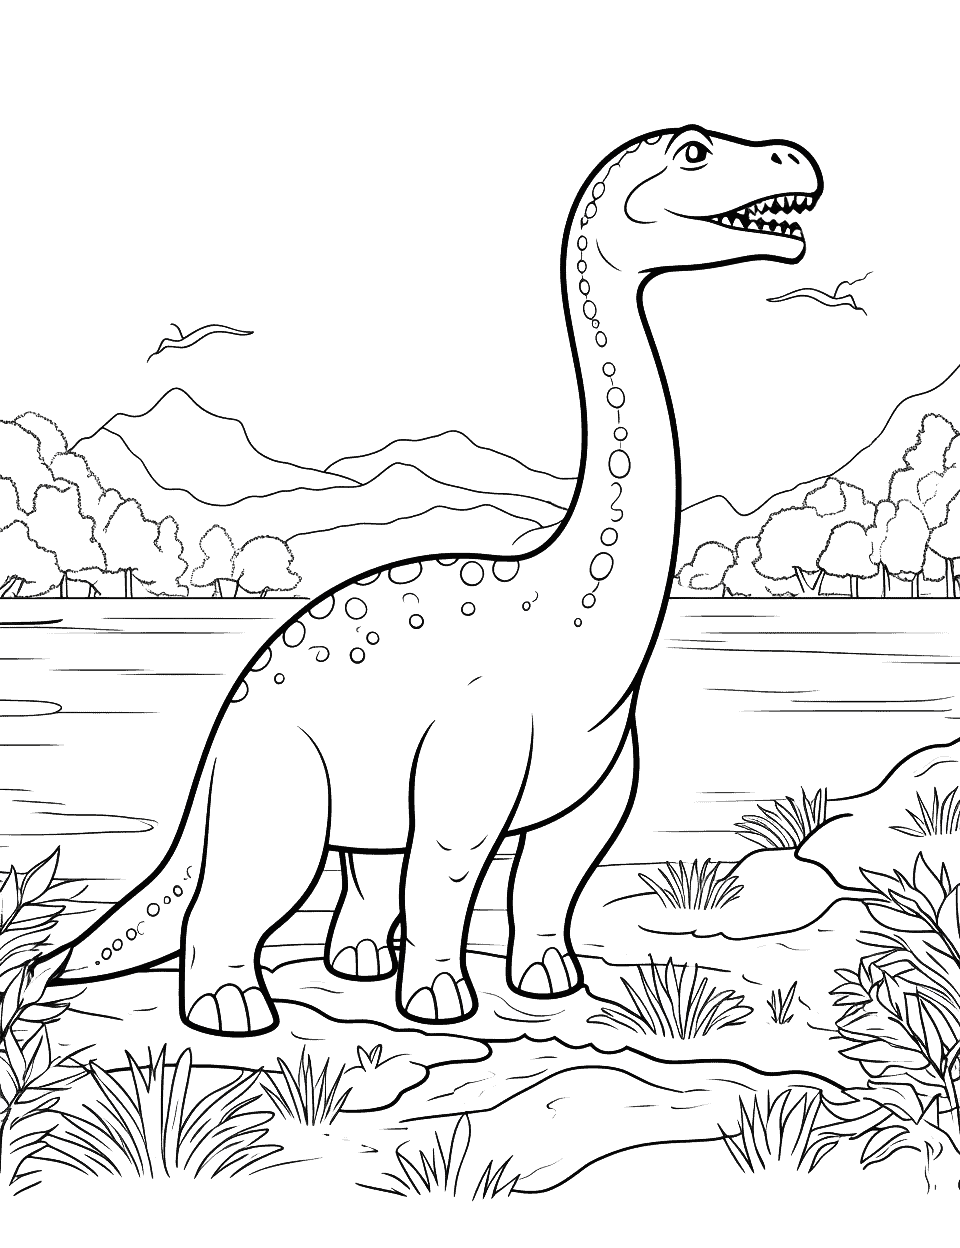 Brachiosaurus at the River Dinosaur Coloring Page - A Brachiosaurus drinking water from a prehistoric river.